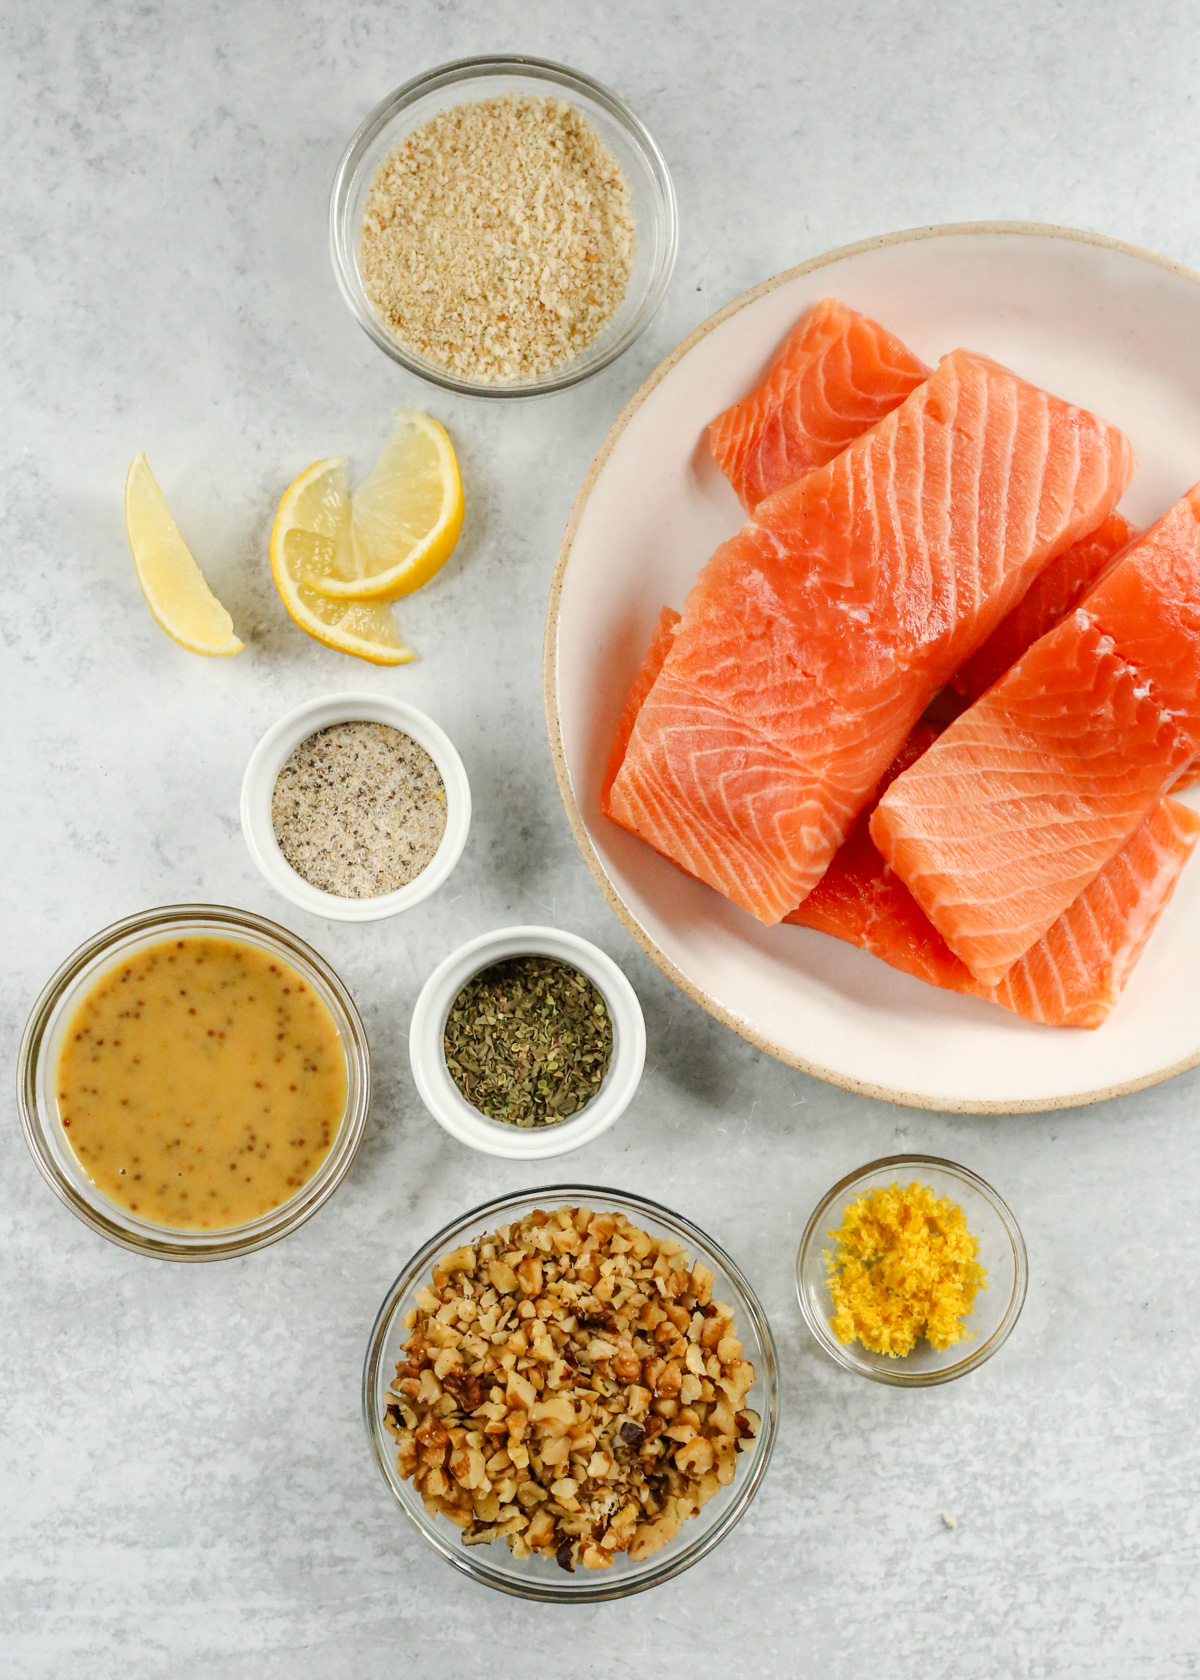 A display of the ingredients needed to make a walnut crusted salmon recipe, including uncooked salmon fillets, an all purpose seasoning blend, dried herbs, a maple dijon glaze, lemon zest, and chopped walnuts, arranged on a kitchen countertop